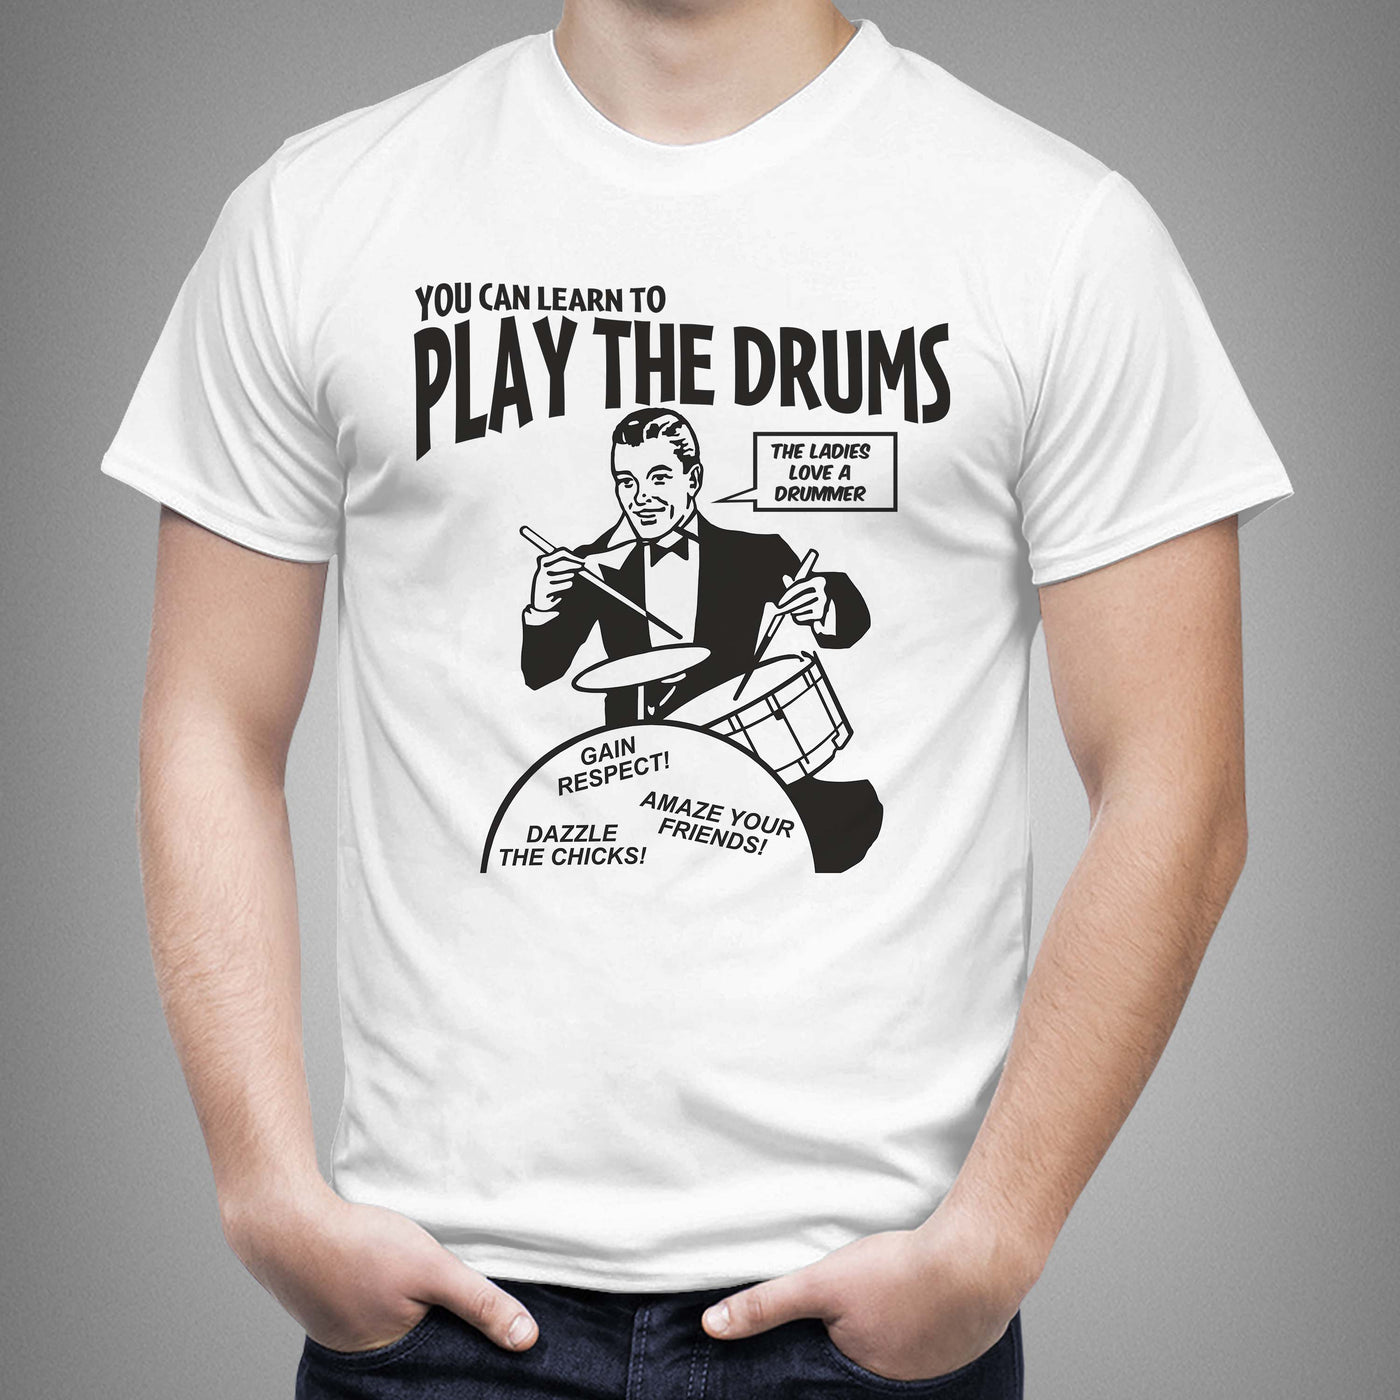 Learn To Play The Drums